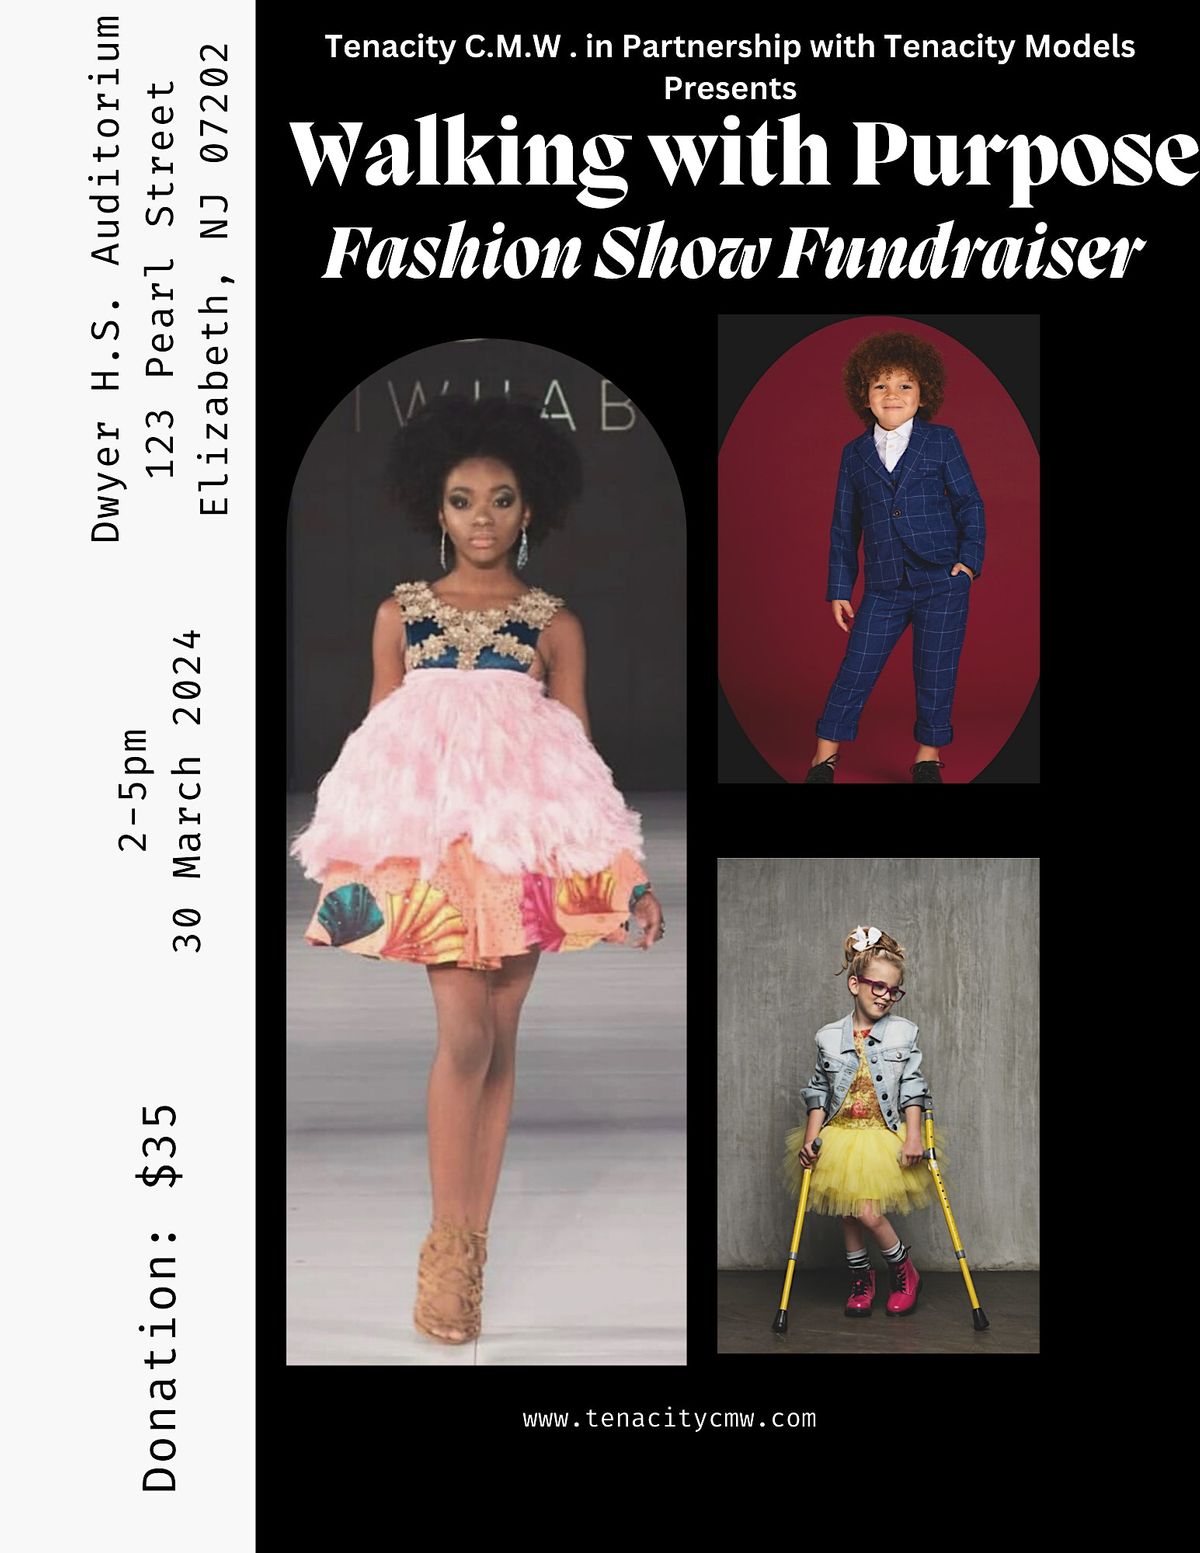 2nd Annual Walking with Purpose Fashion Show Fundraiser